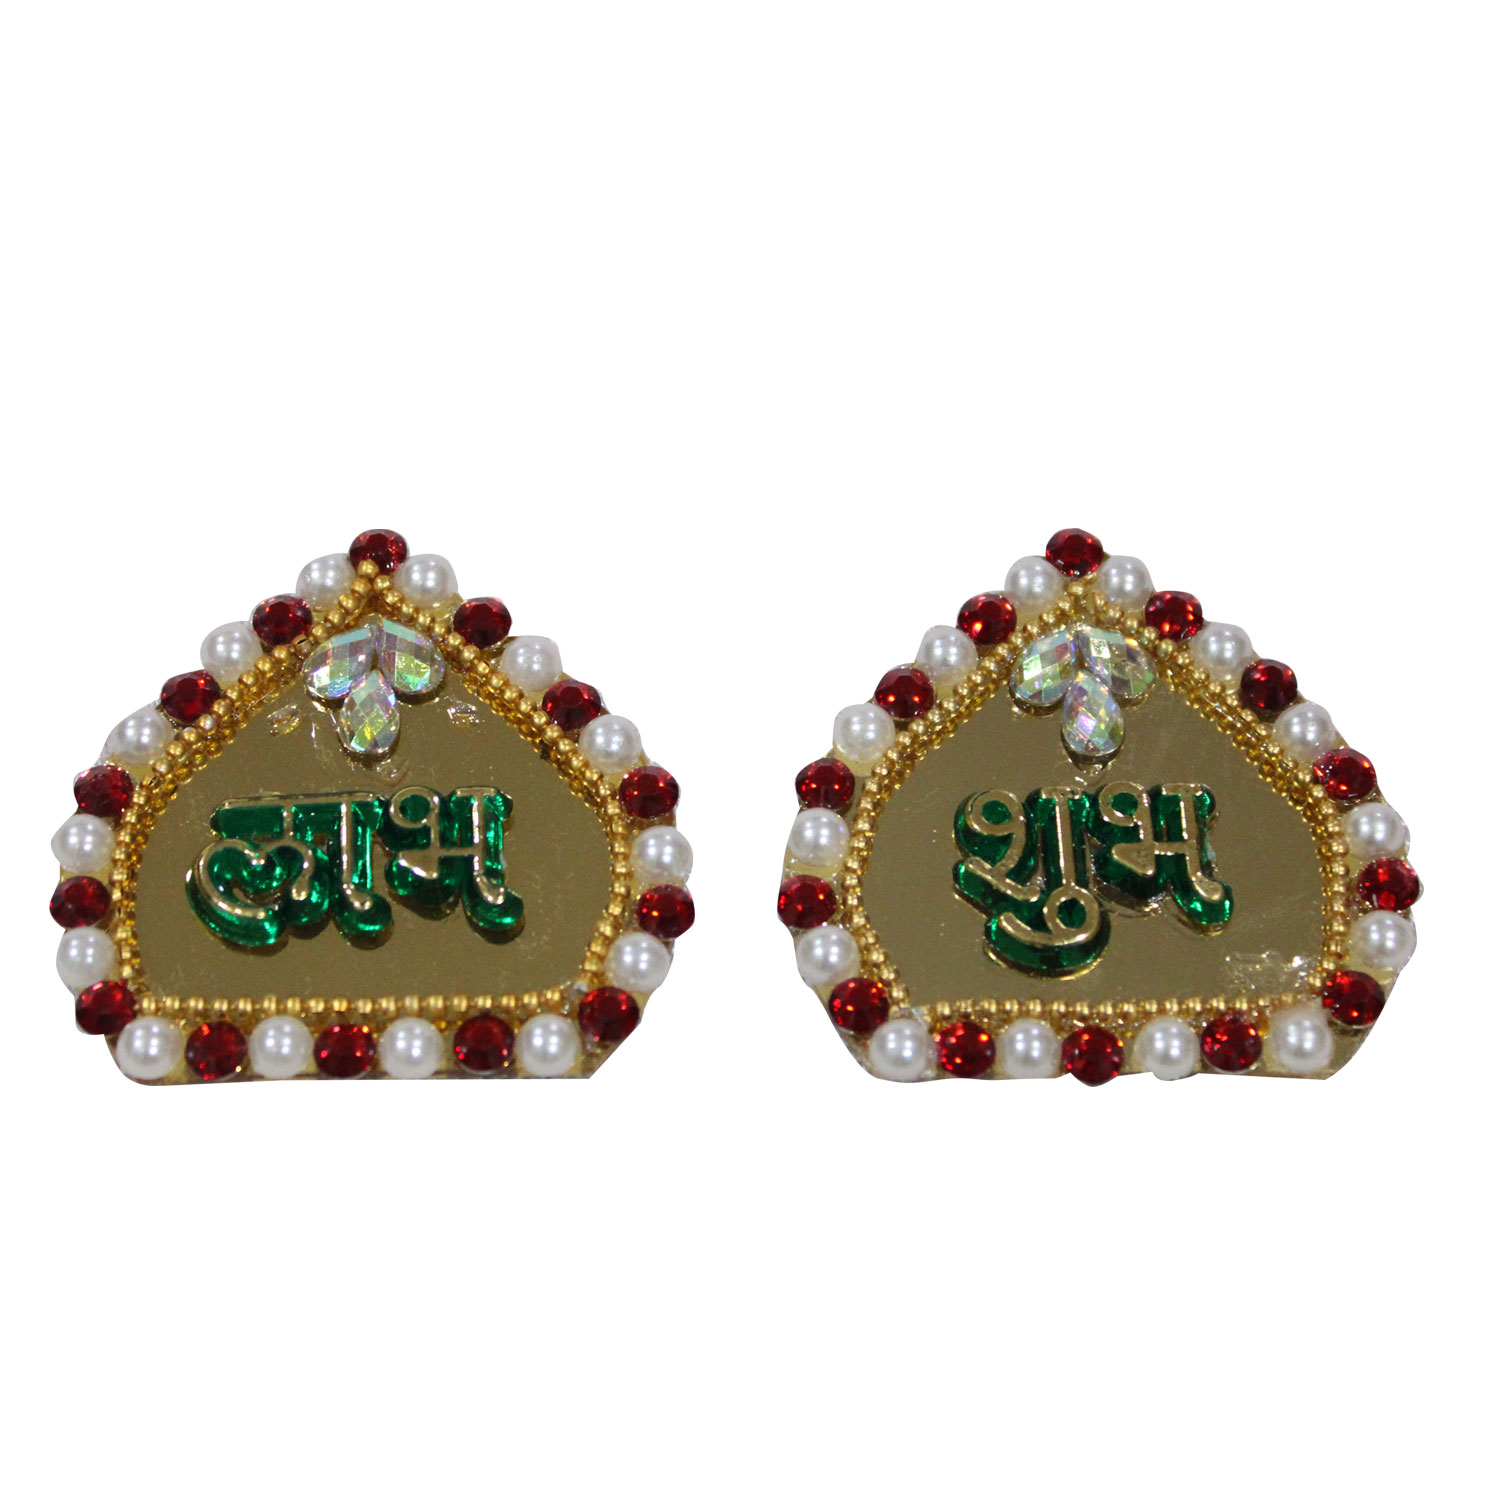 Acrelic Golden Color Diamond with Beads Labh Shubh